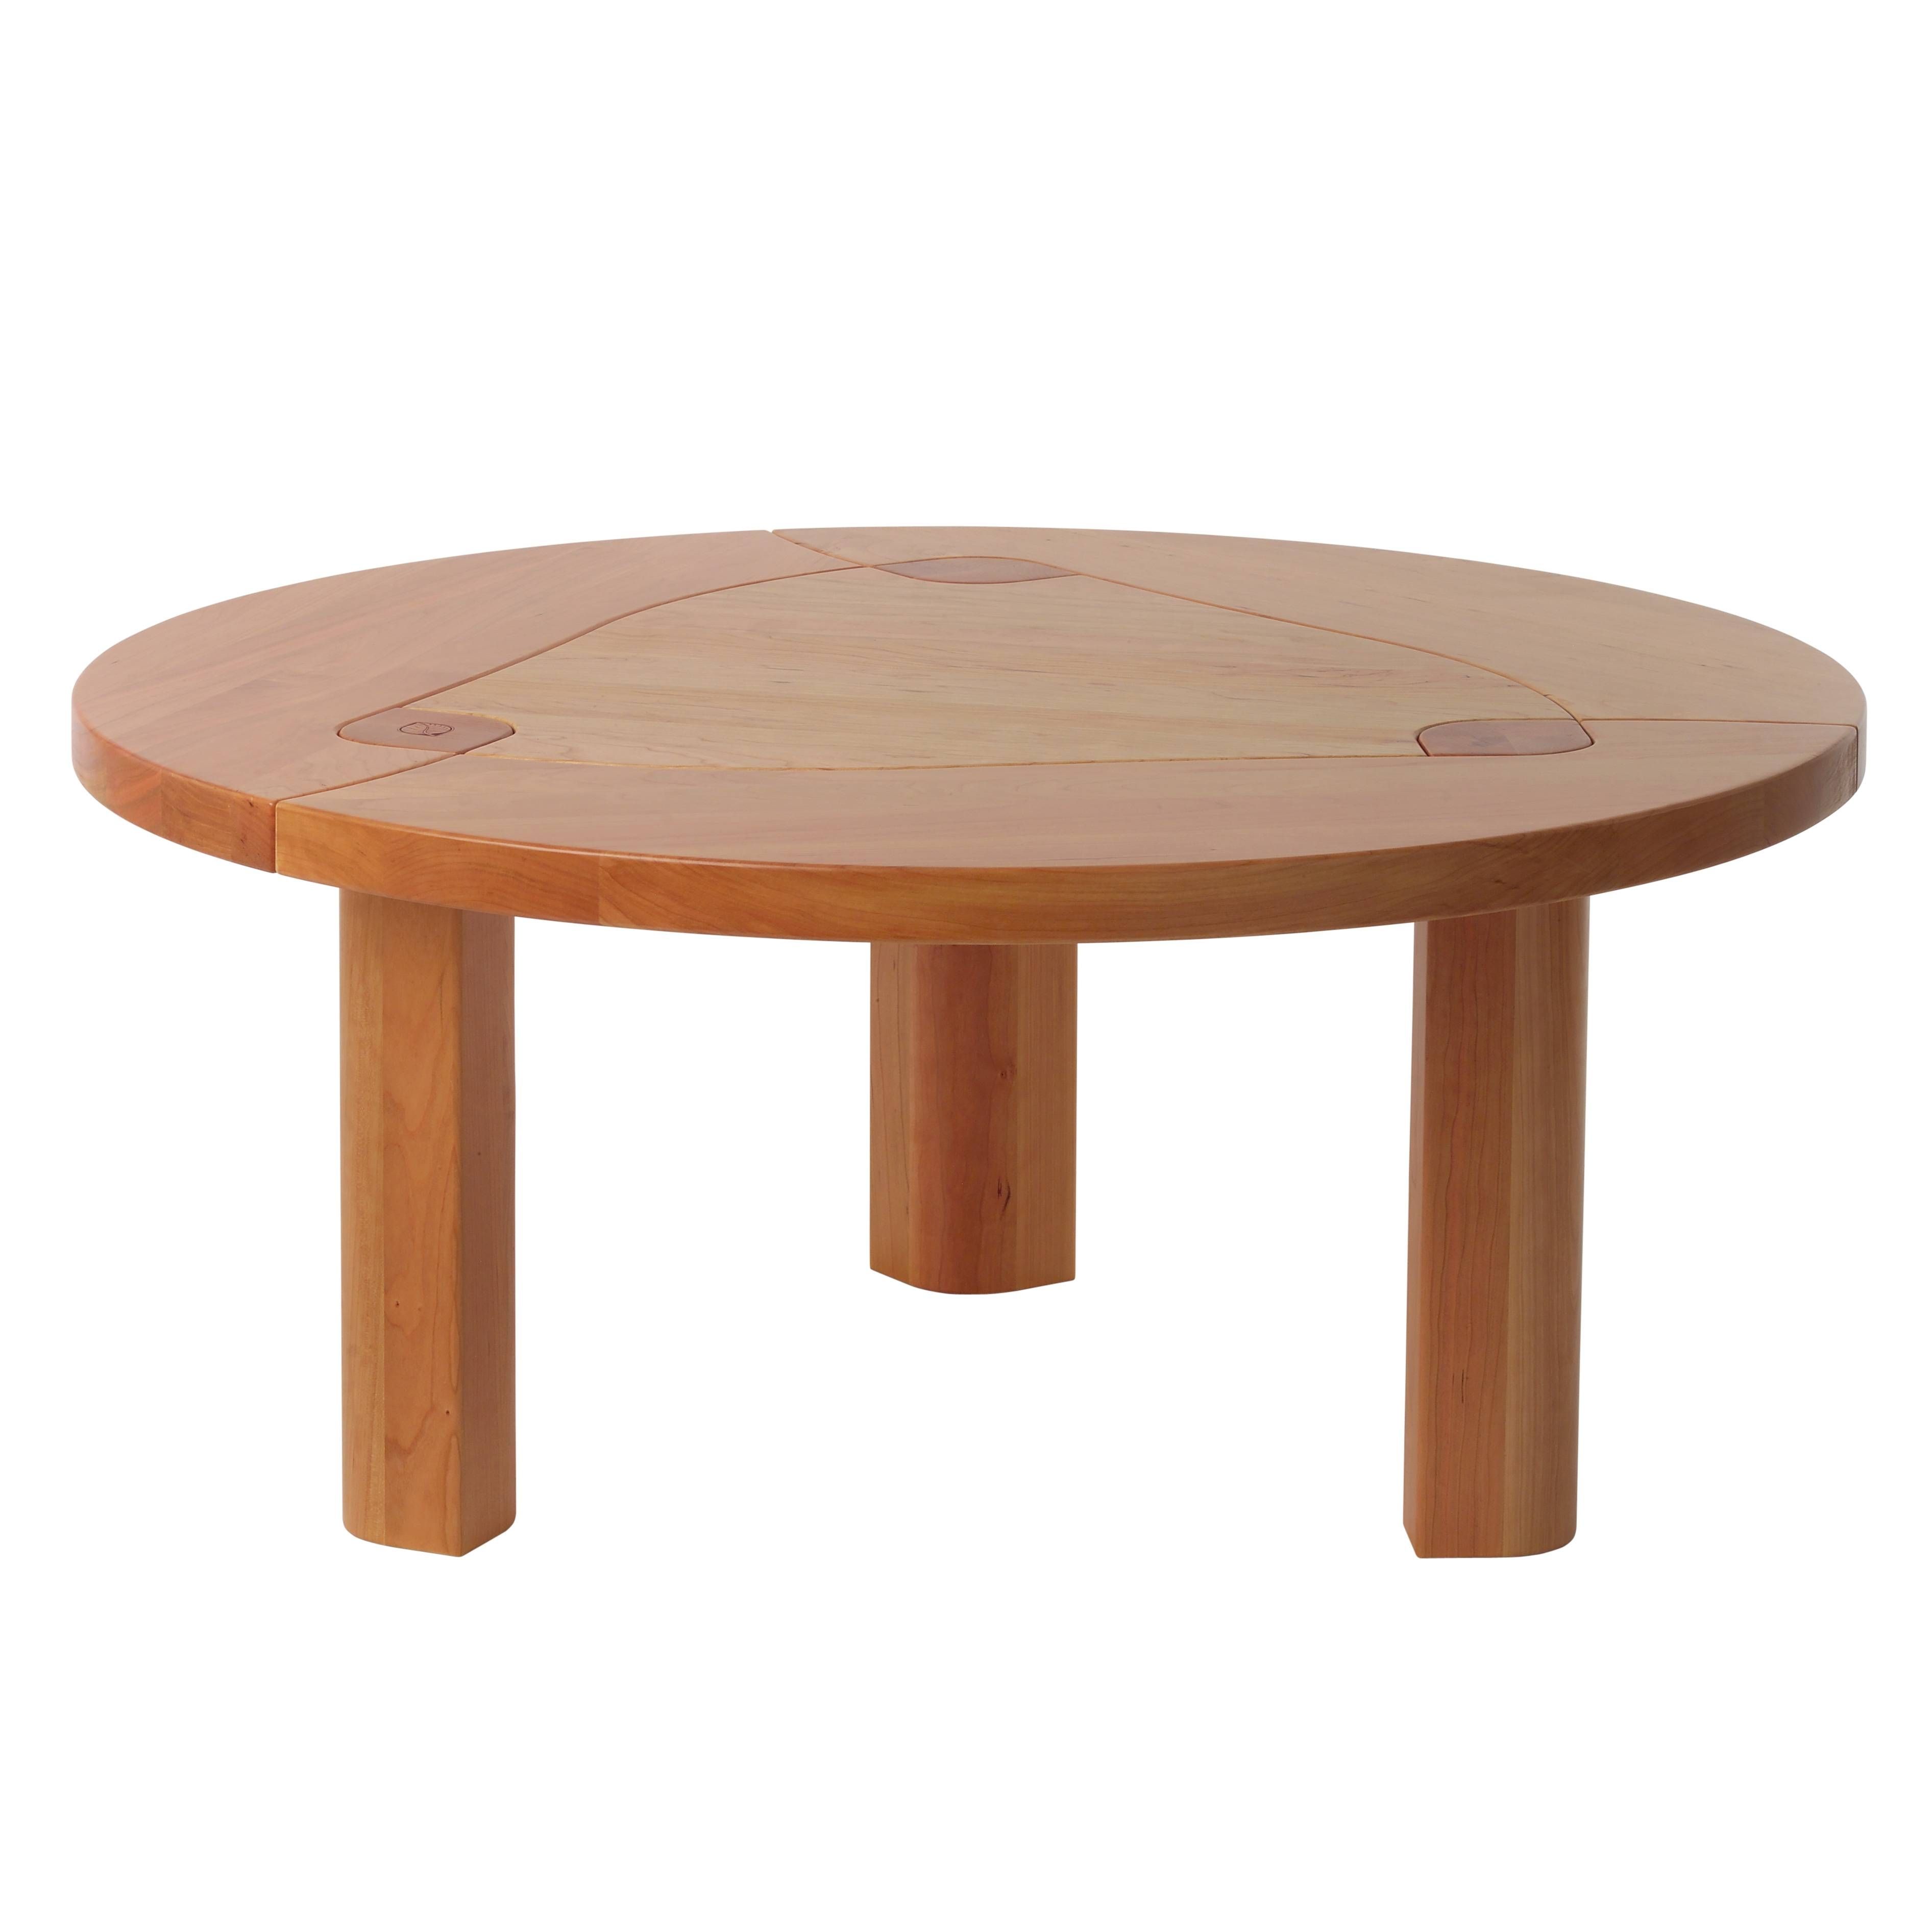 Small Round Oak Coffee Table – Starrkingschool In Small Circle Coffee Tables (View 5 of 30)